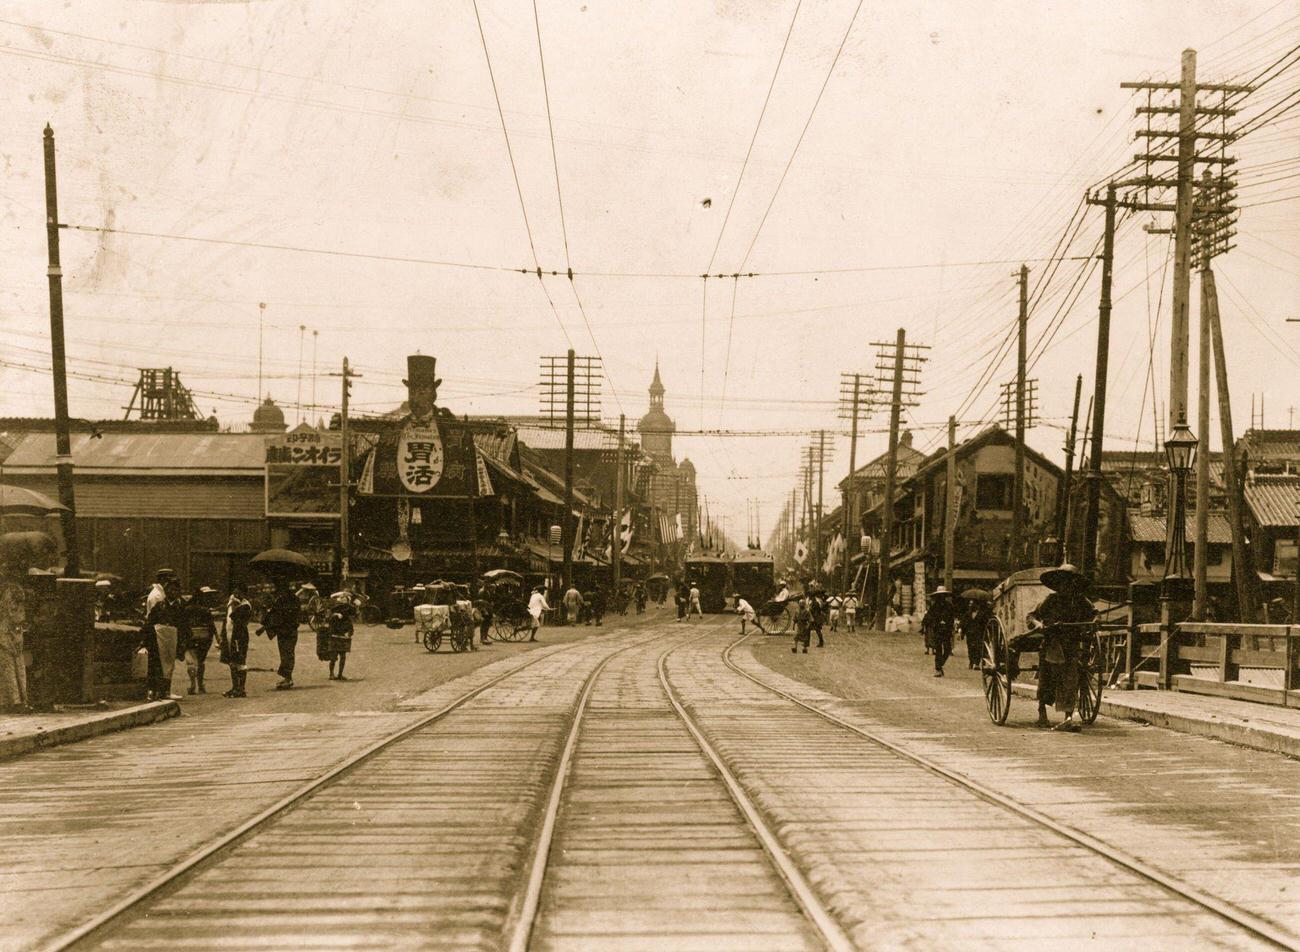 Center of Tokyo street with cable car tracks in foreground, buildings and people in background, 1905